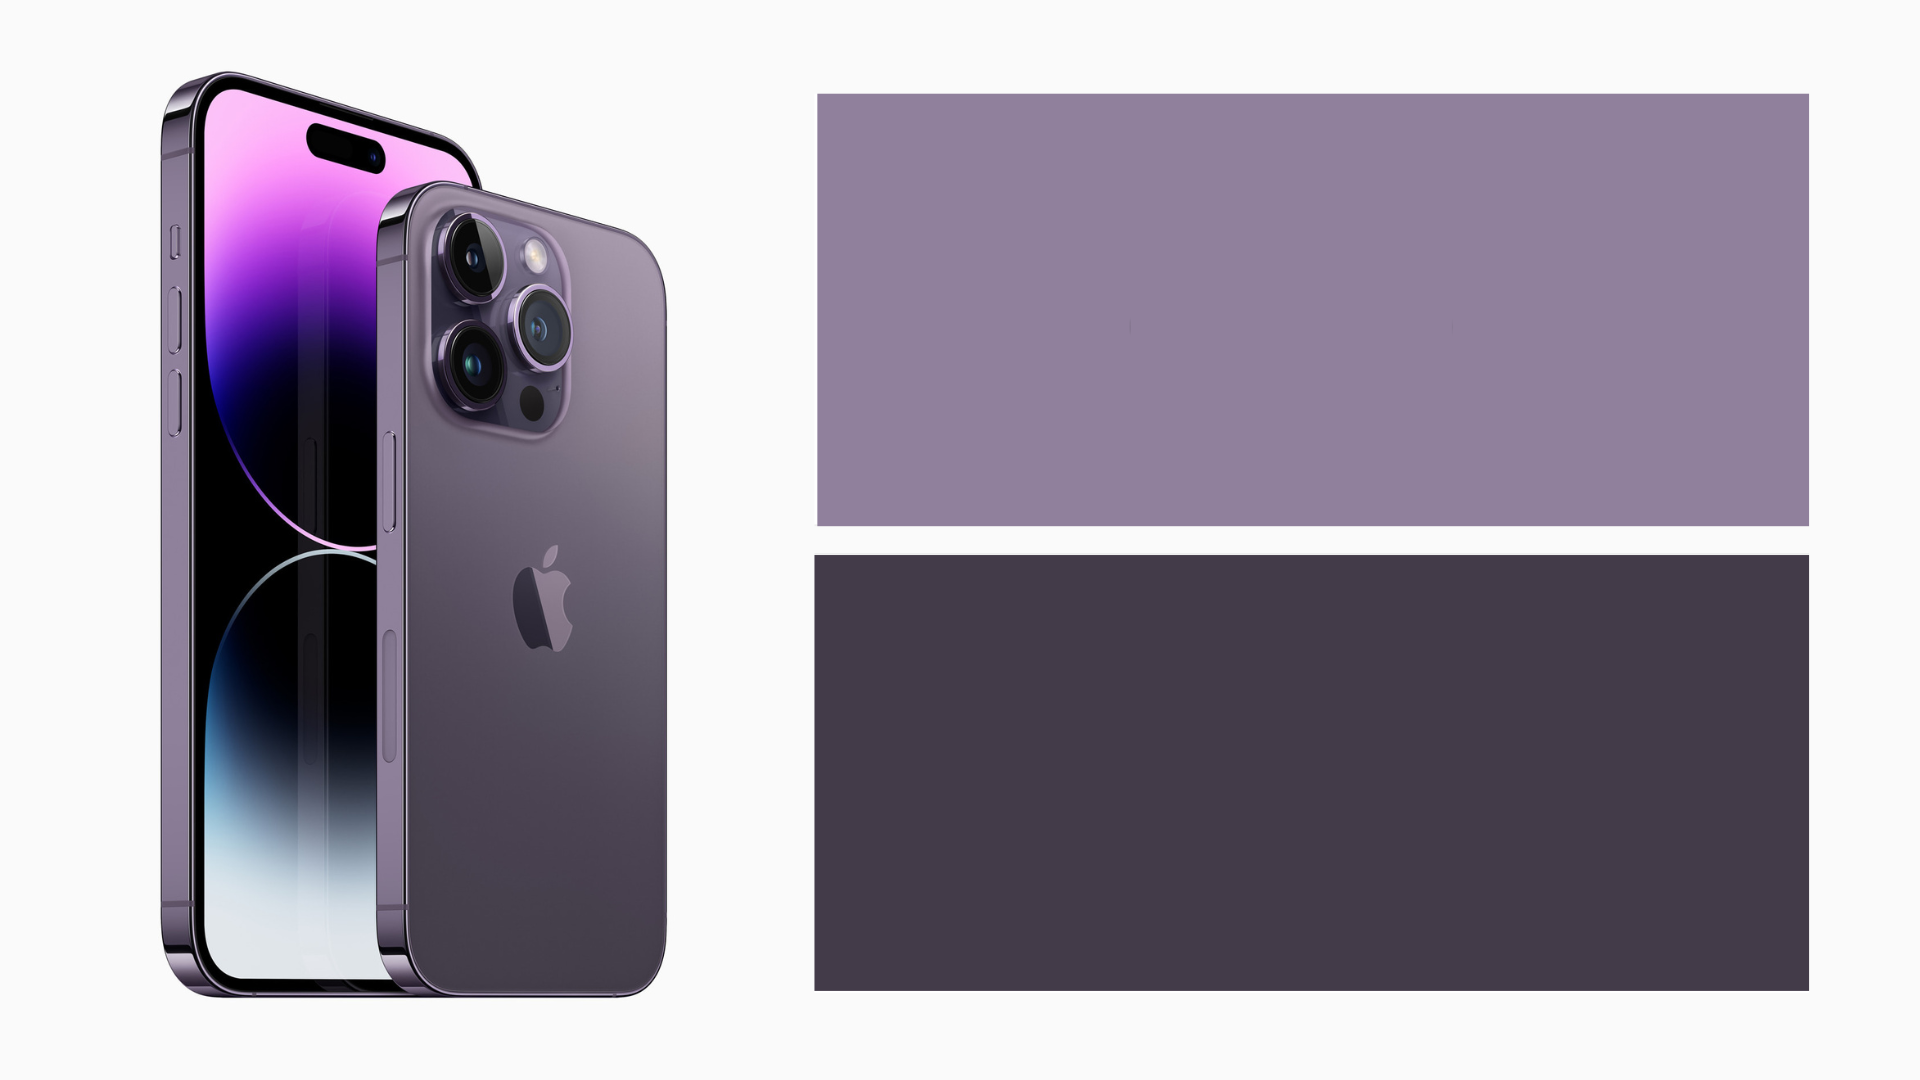 Is the iPhone 14 Pro actually ‘deep purple?’ We investigate.